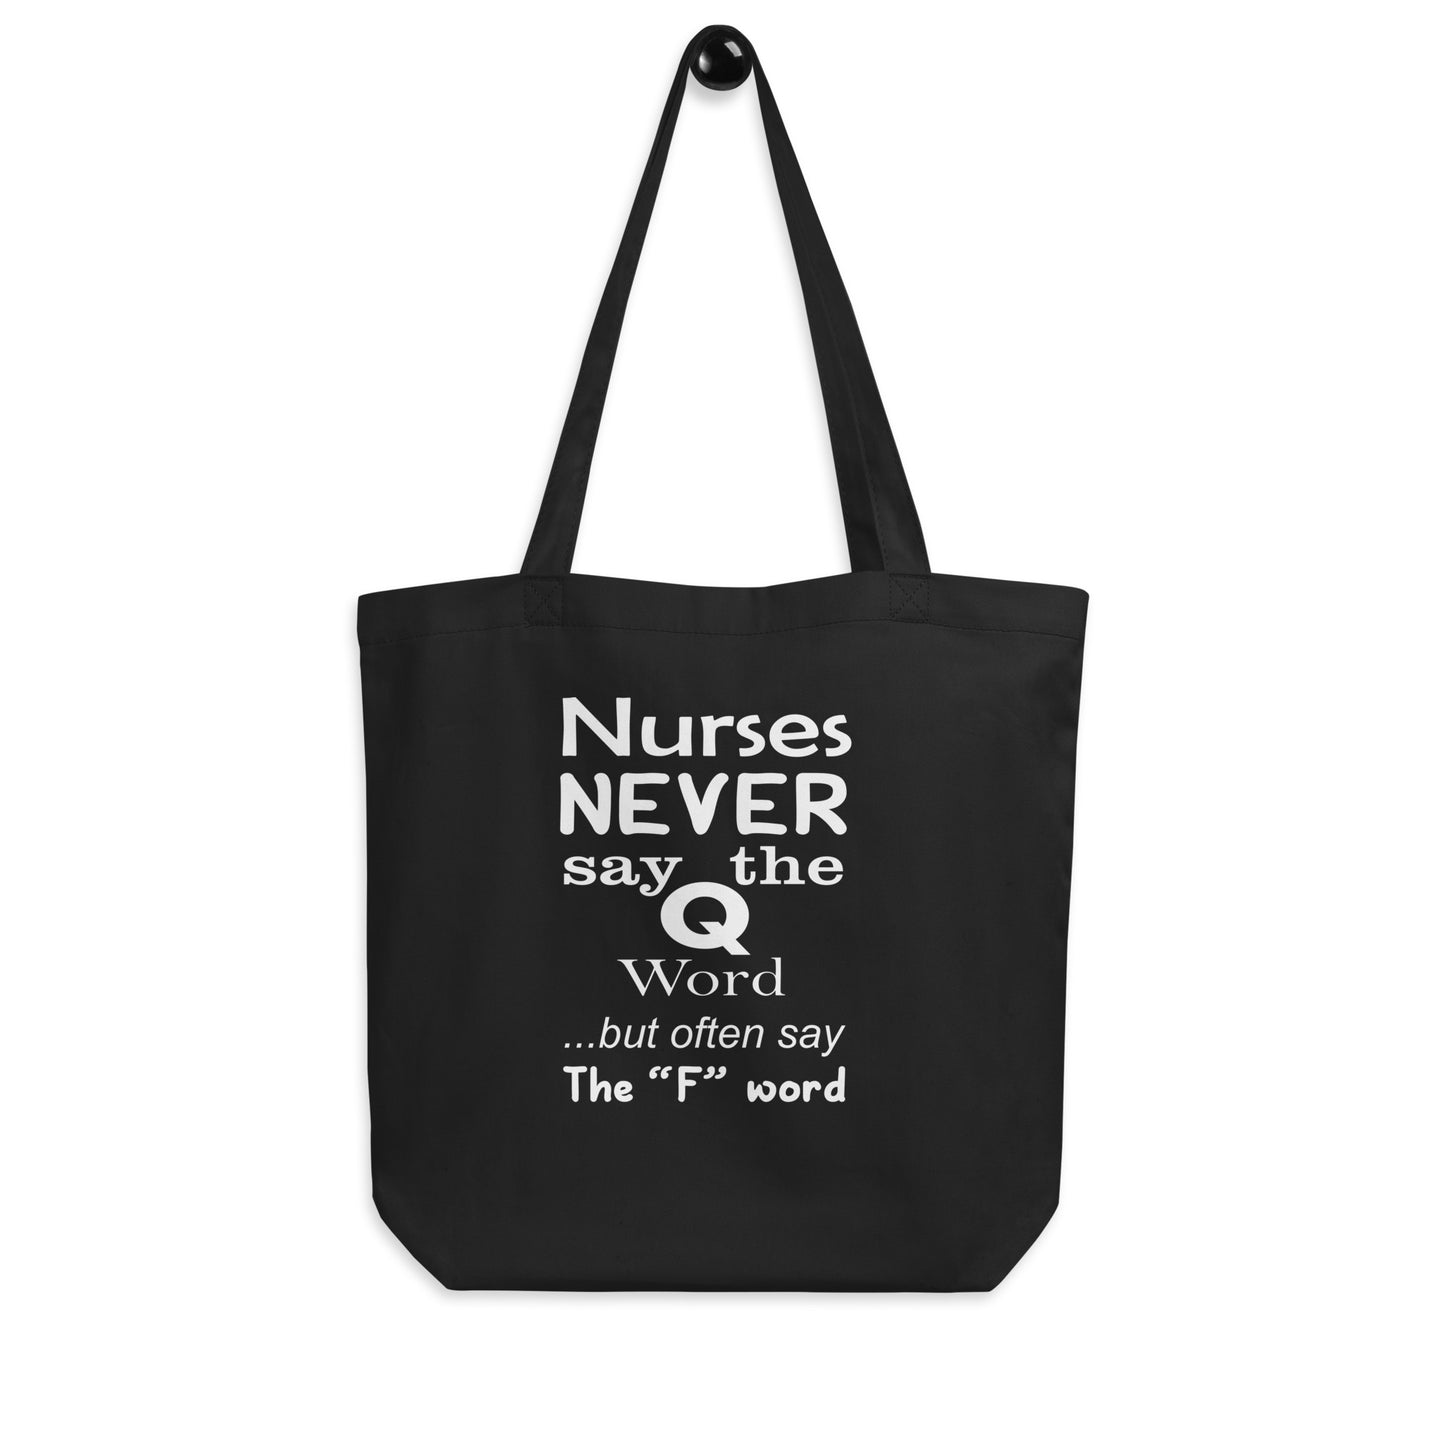 Nurses Never Say the Q word but often say the F word